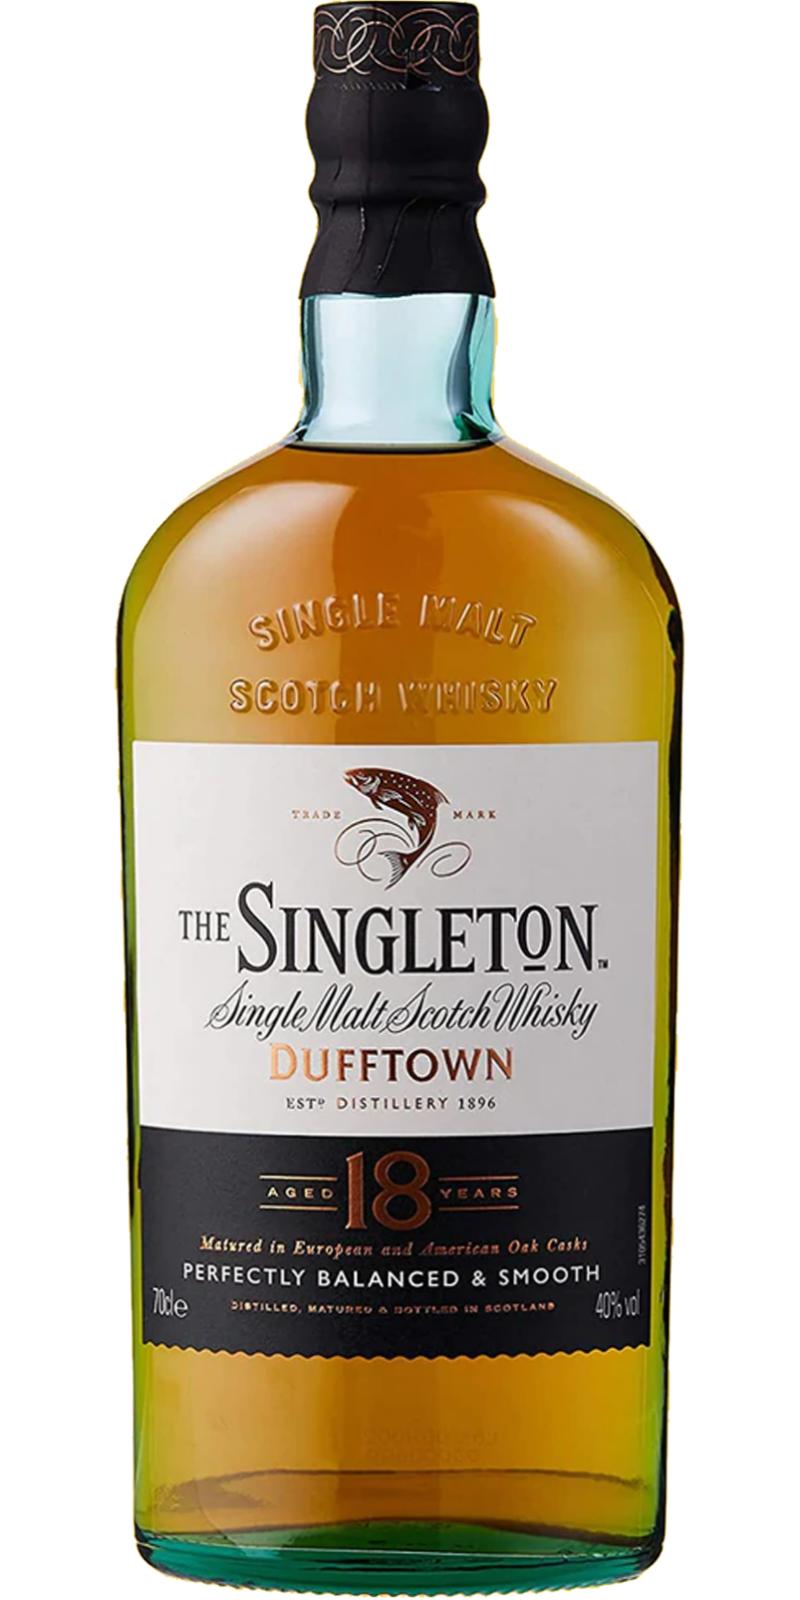 The Singleton of Dufftown 18-year-old - Ratings and reviews 